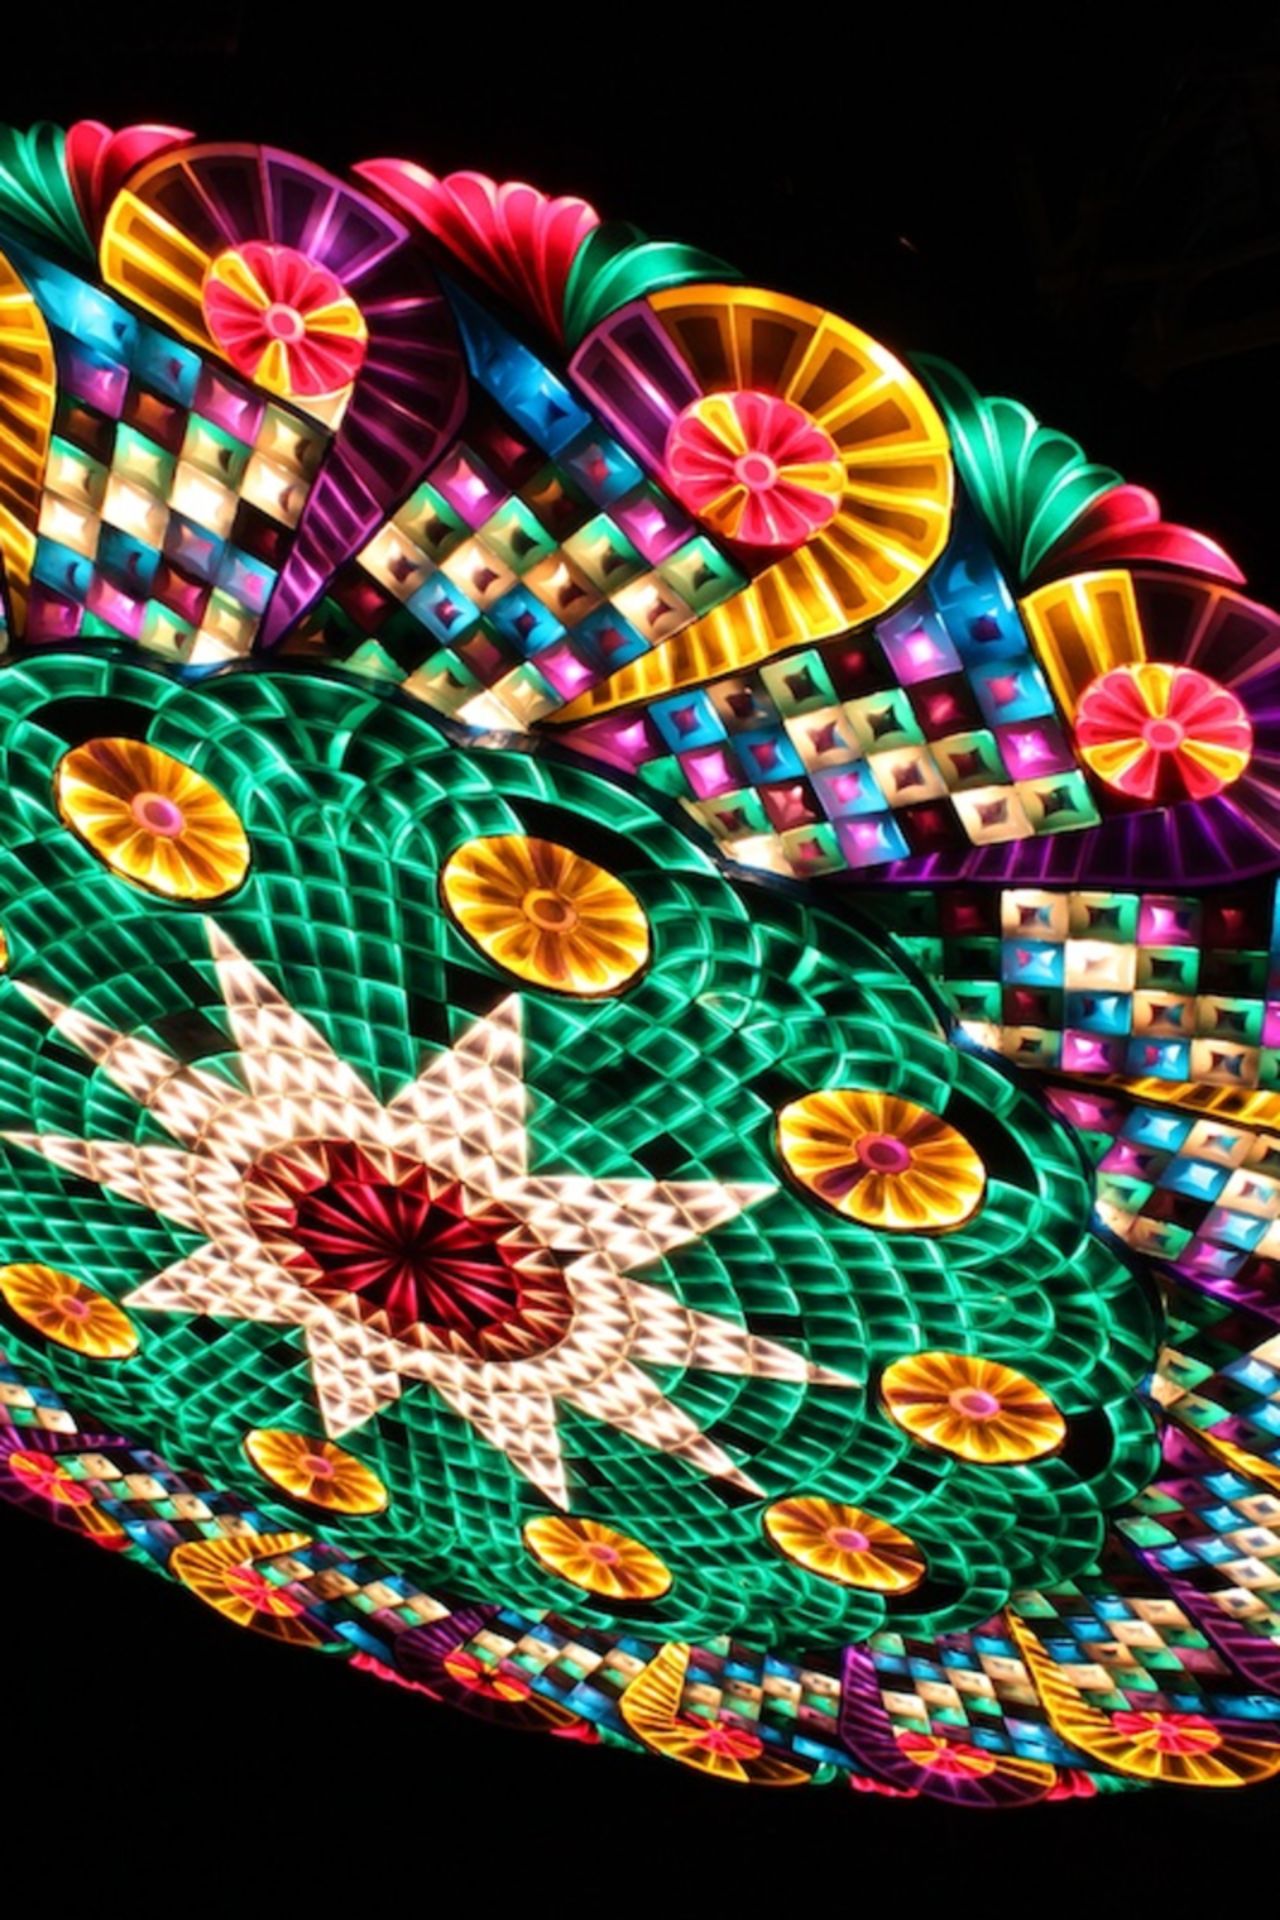 A finished giant Christmas parol lights up the night sky at the annual Christmas festival in San Fernando. Polyvinyl plastic in a hodgepodge of colors usually covers a giant parol. 